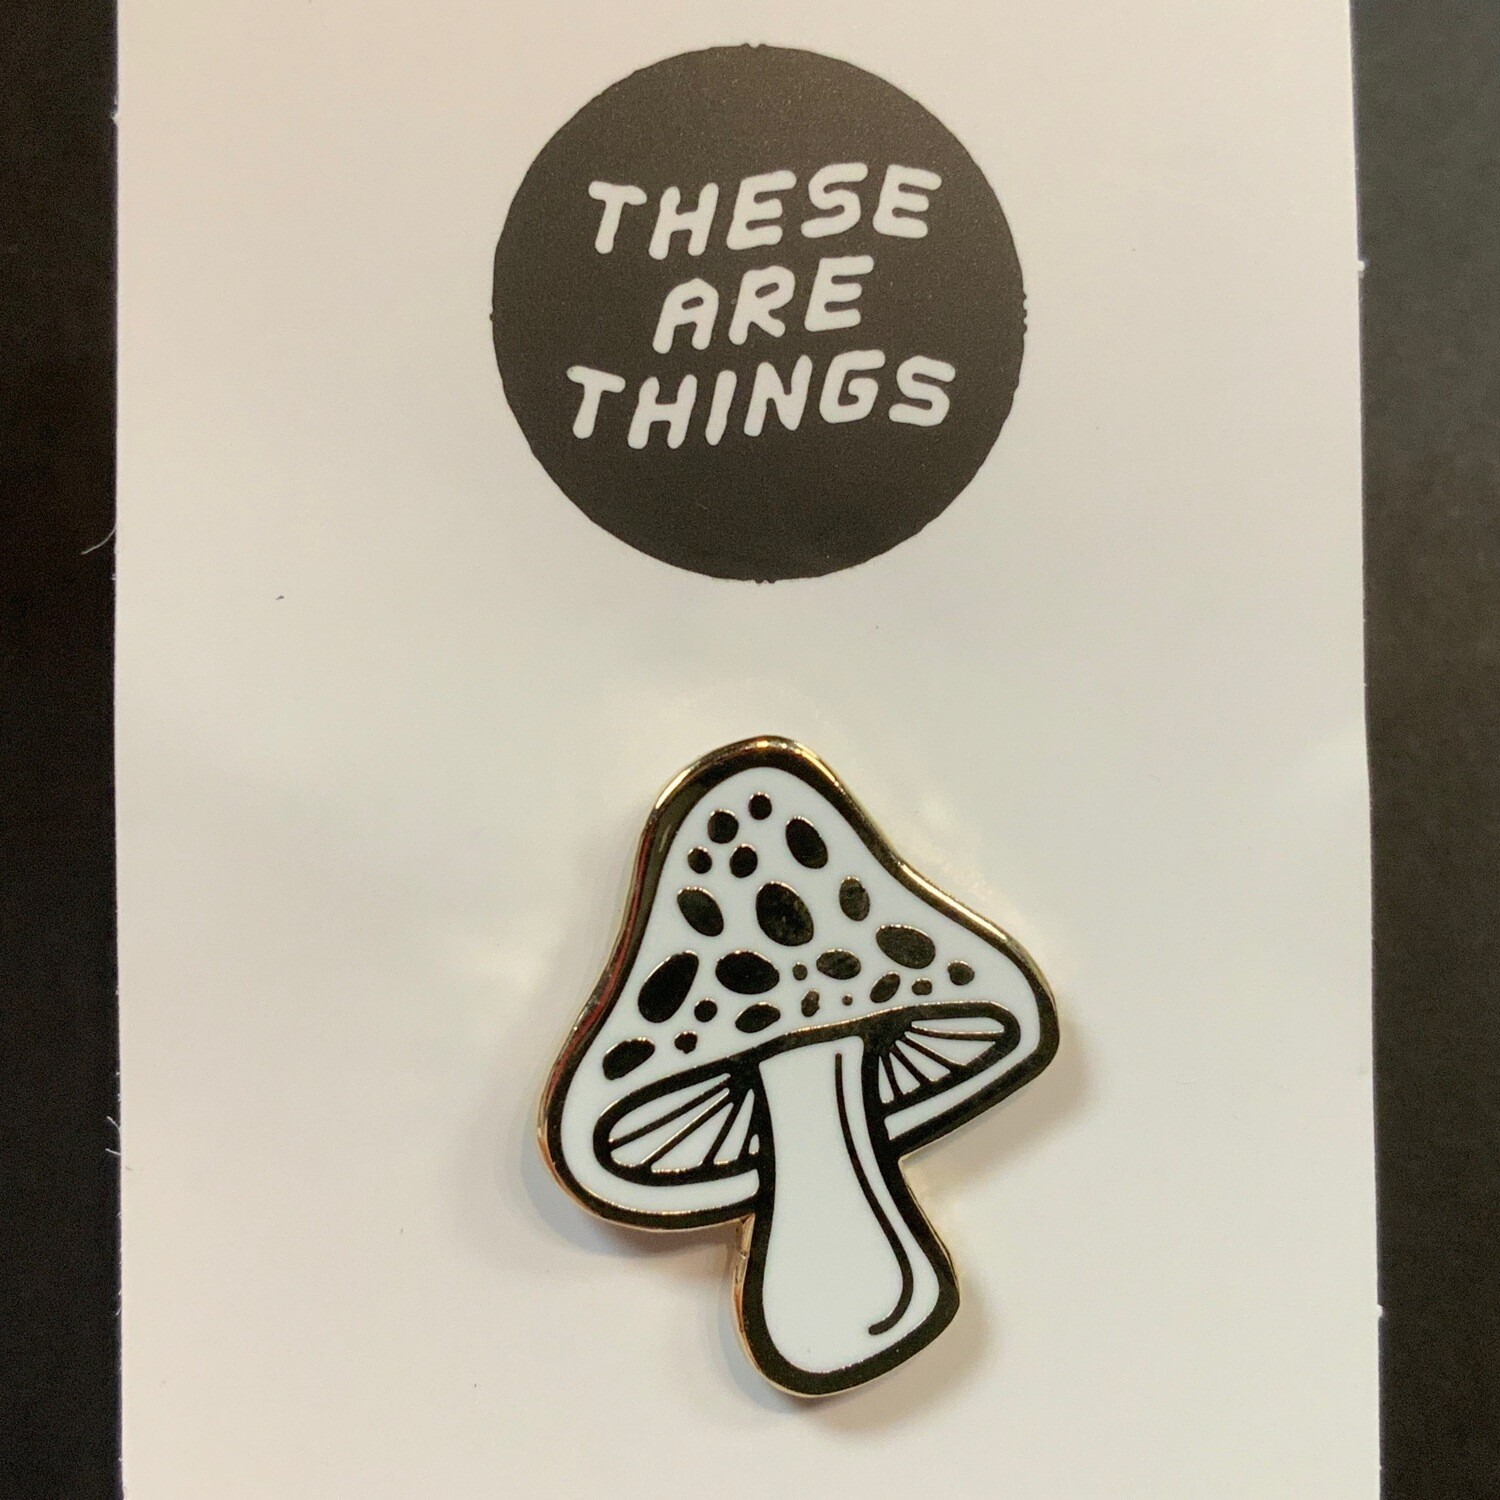 White and Gold Mushroom - Enamel Pin from These Are Things